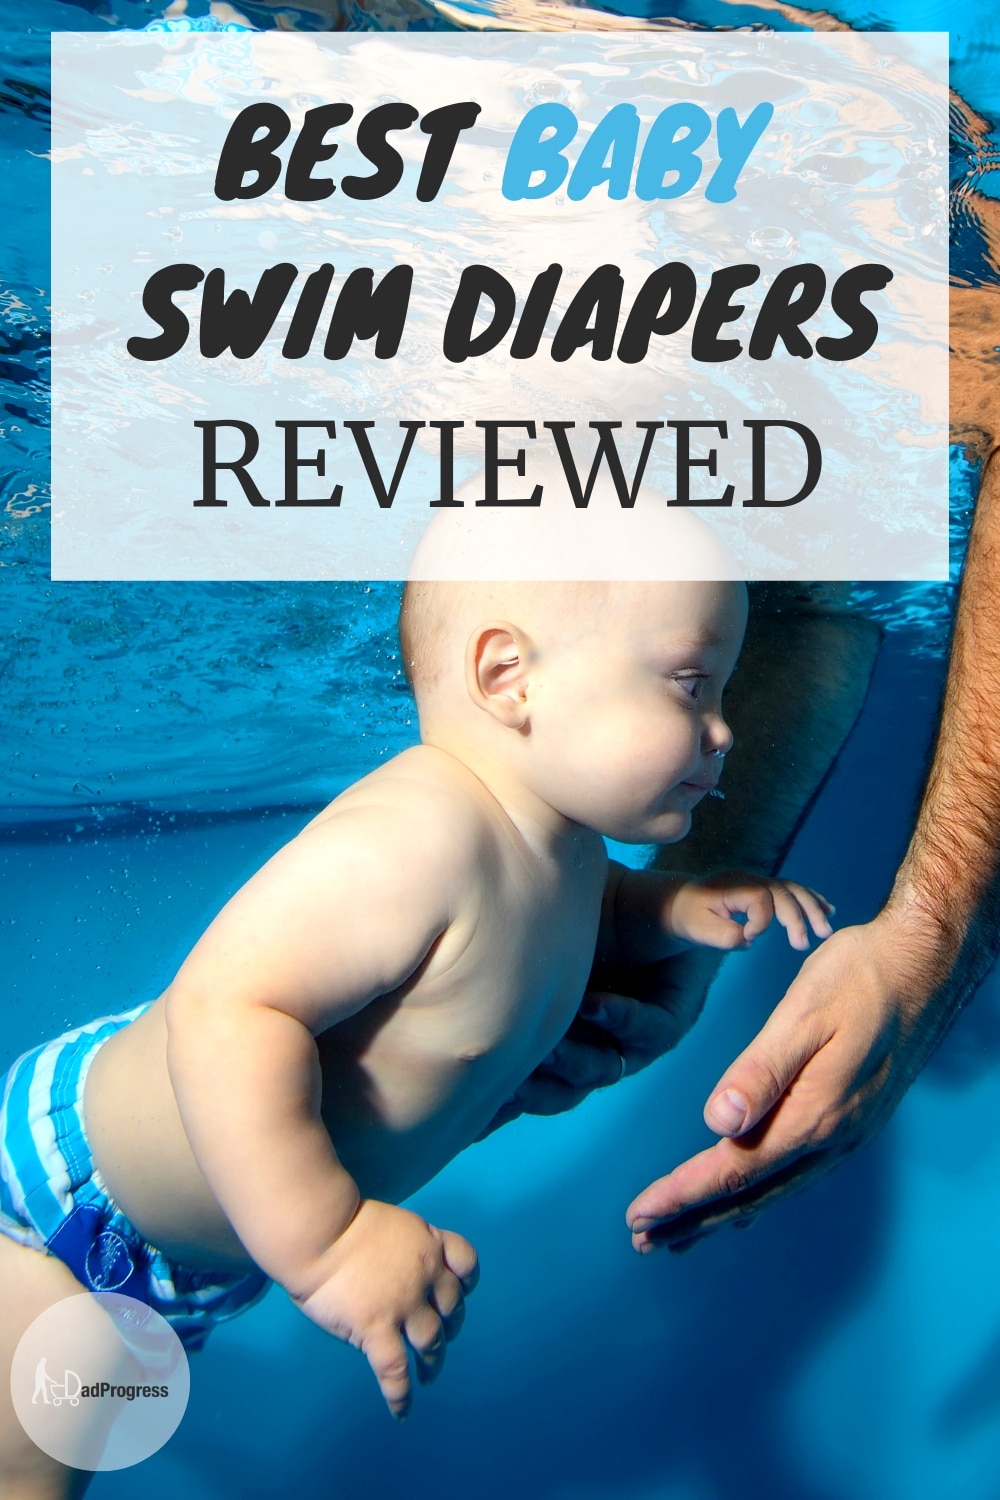 Finding the best reusable and disposable swim diapers for your baby or toddler can be a time-consuming task, and parents have better things to do before vacation. I've got your back here- I wrote a guide on the subject, just click to read more